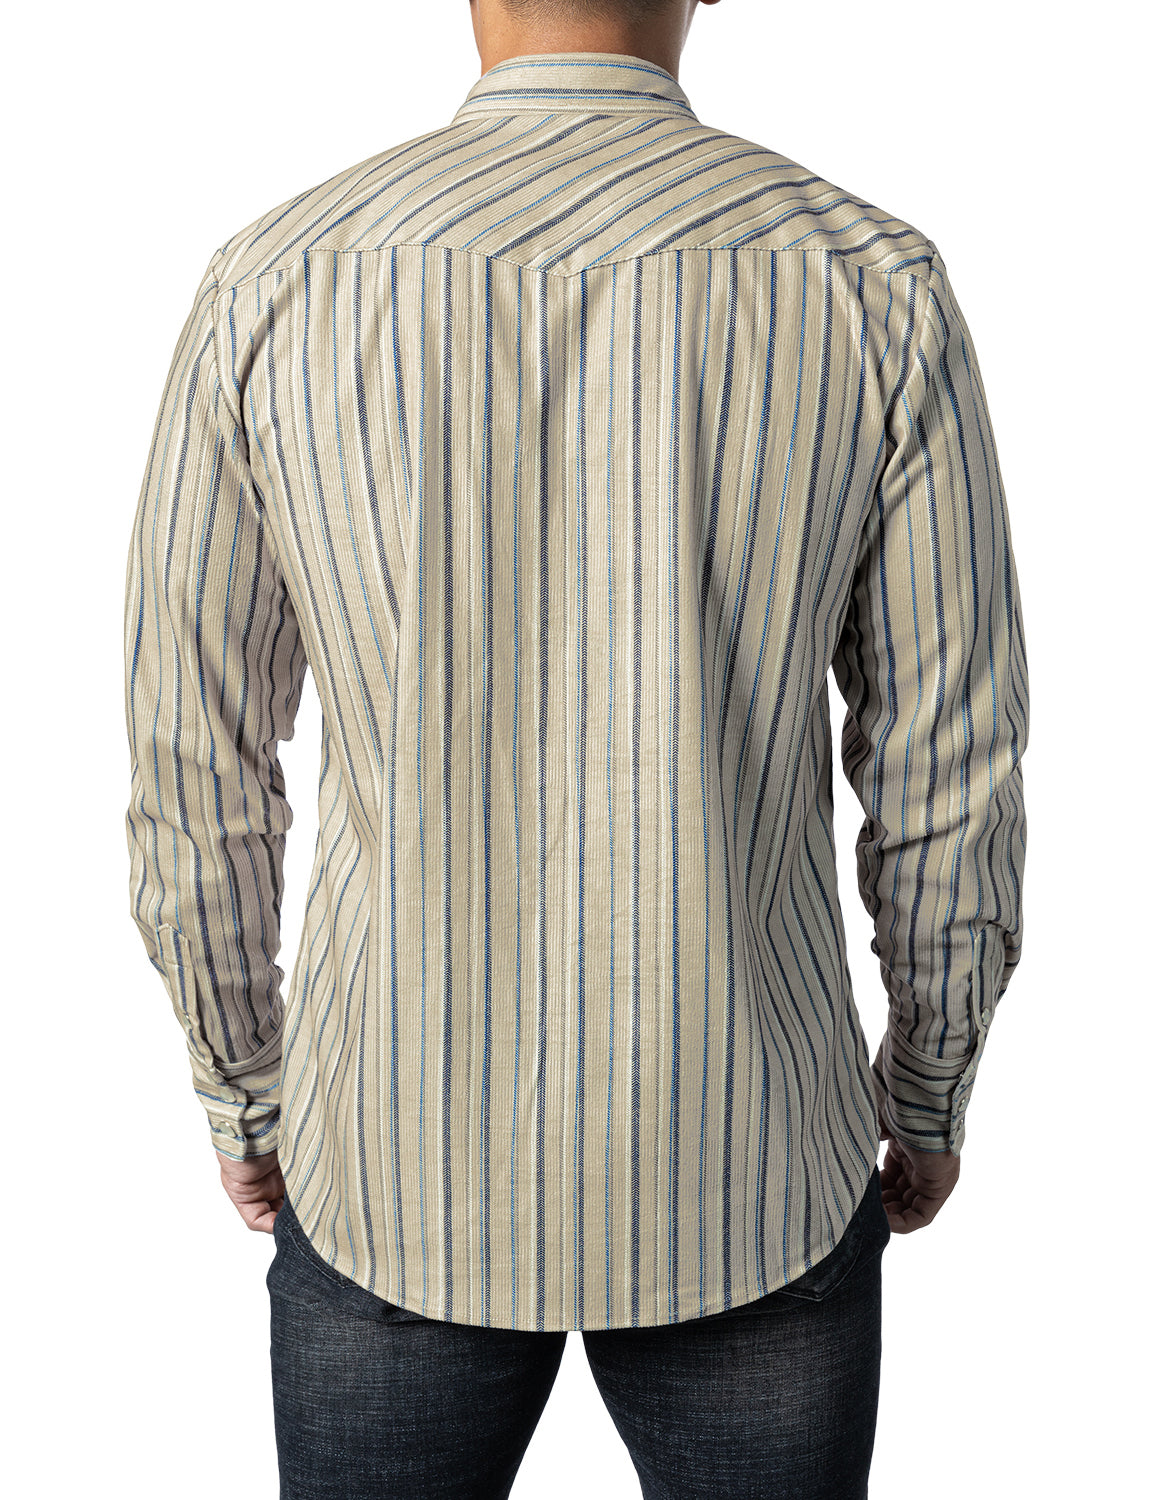 JOGAL Men's Corduroy Shirts Long Sleeve Striped Shacket Jacket with Two Flap Pockets